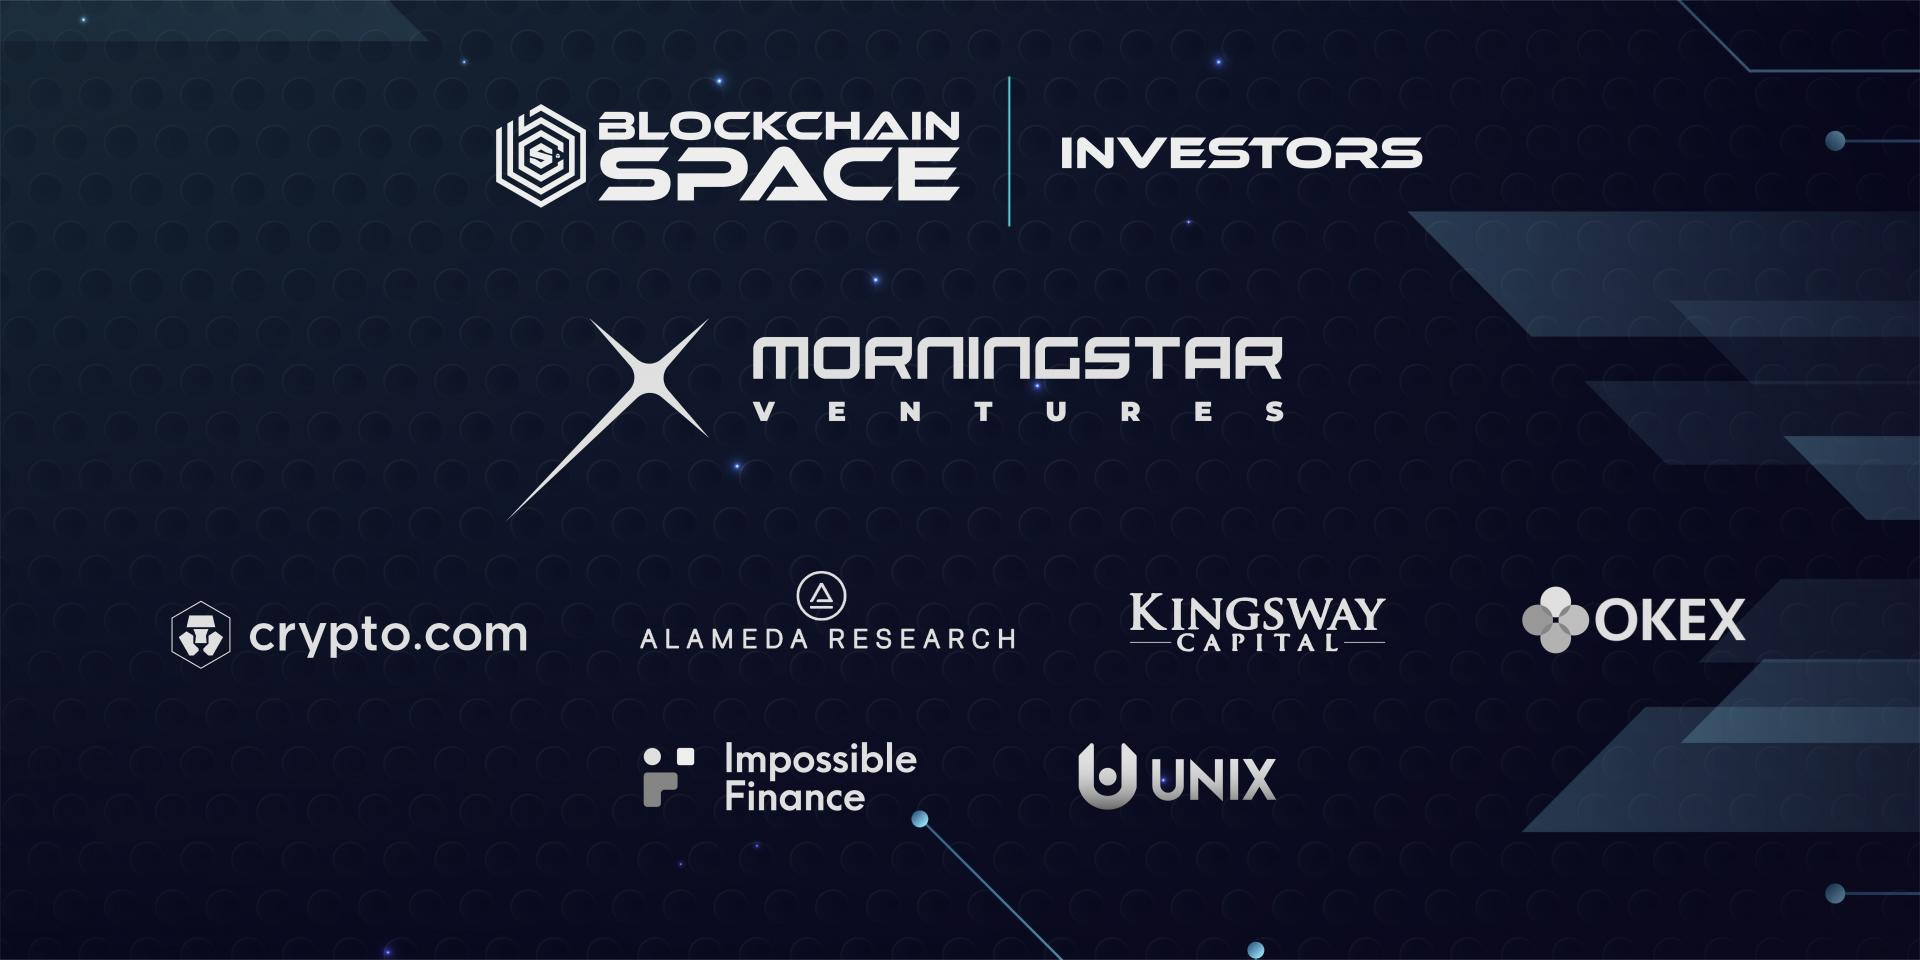 BlockchainSpace Announces $2.4 Million Strategic Funding Round to Onboard 20,000 New Guilds For Further Expansion